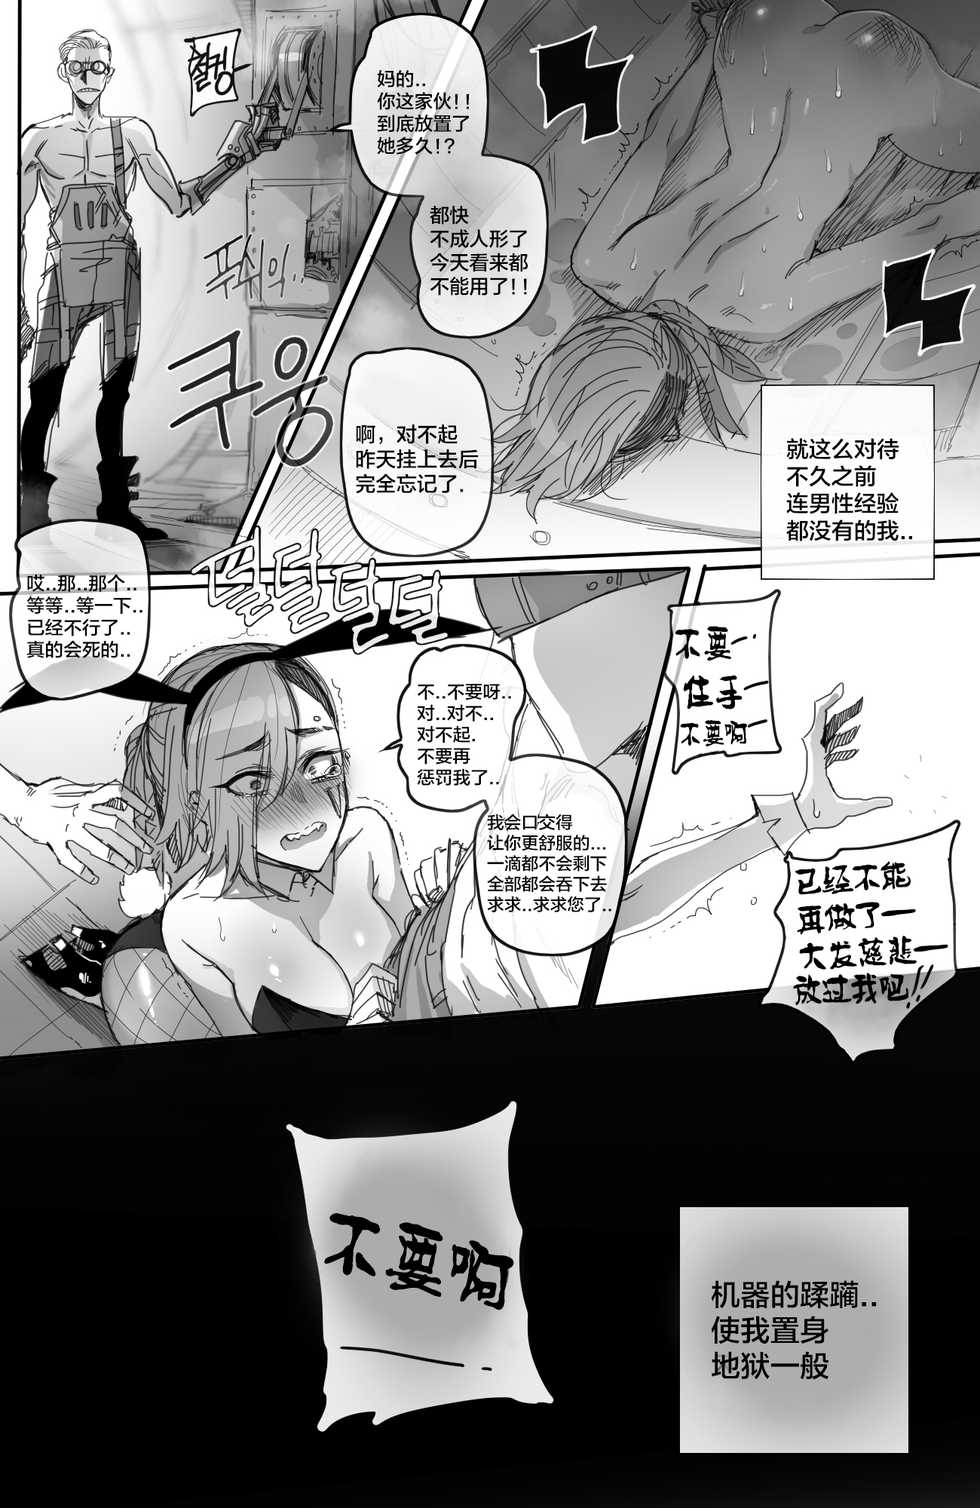 [ratatatat74] Vi (League of Legends) [Chinese] [不咕鸟汉化组] - Page 17